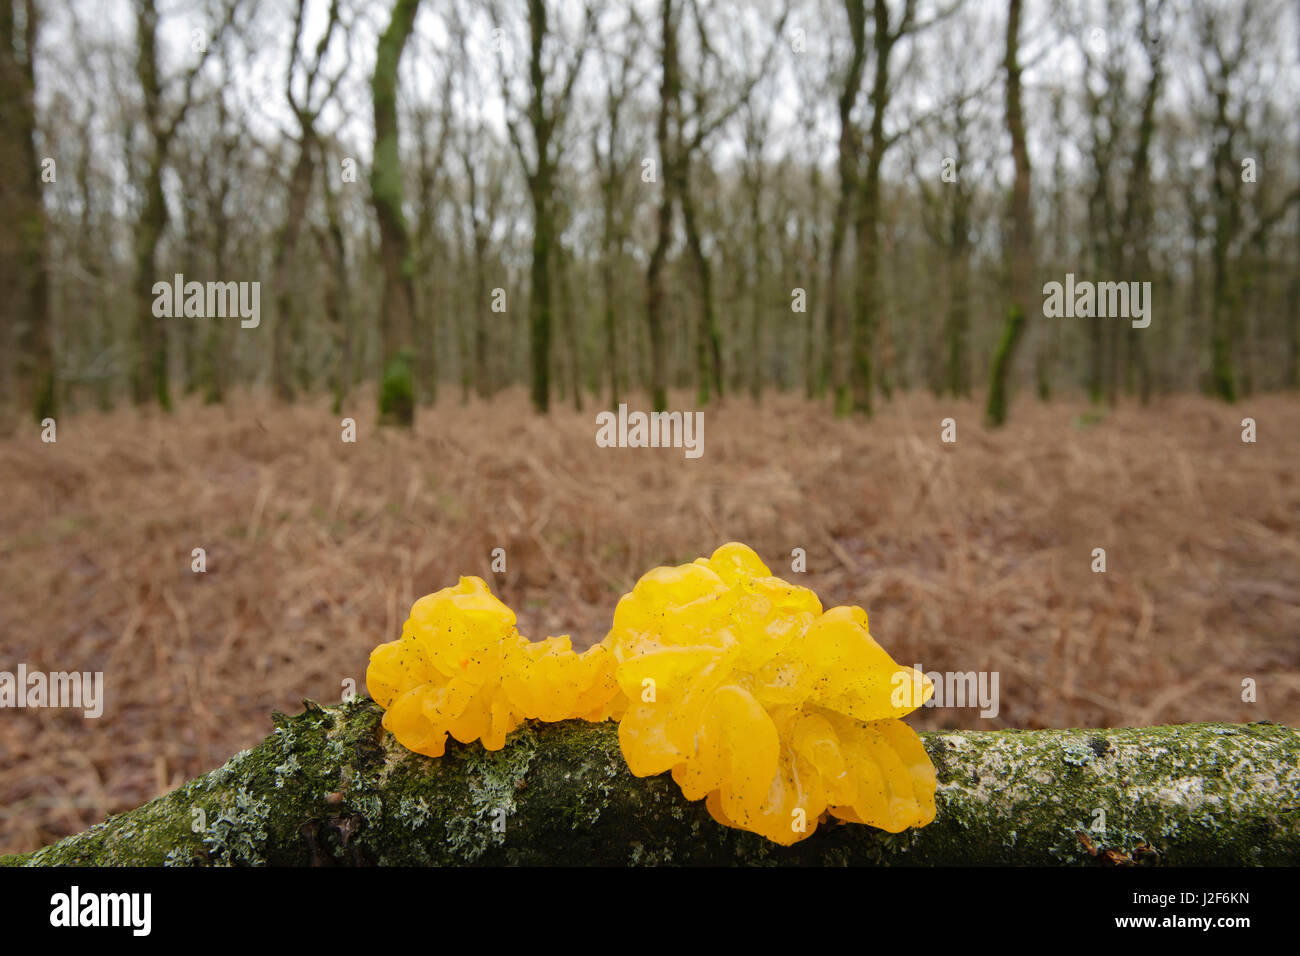 yellow brain on a branch in winter wood Stock Photo